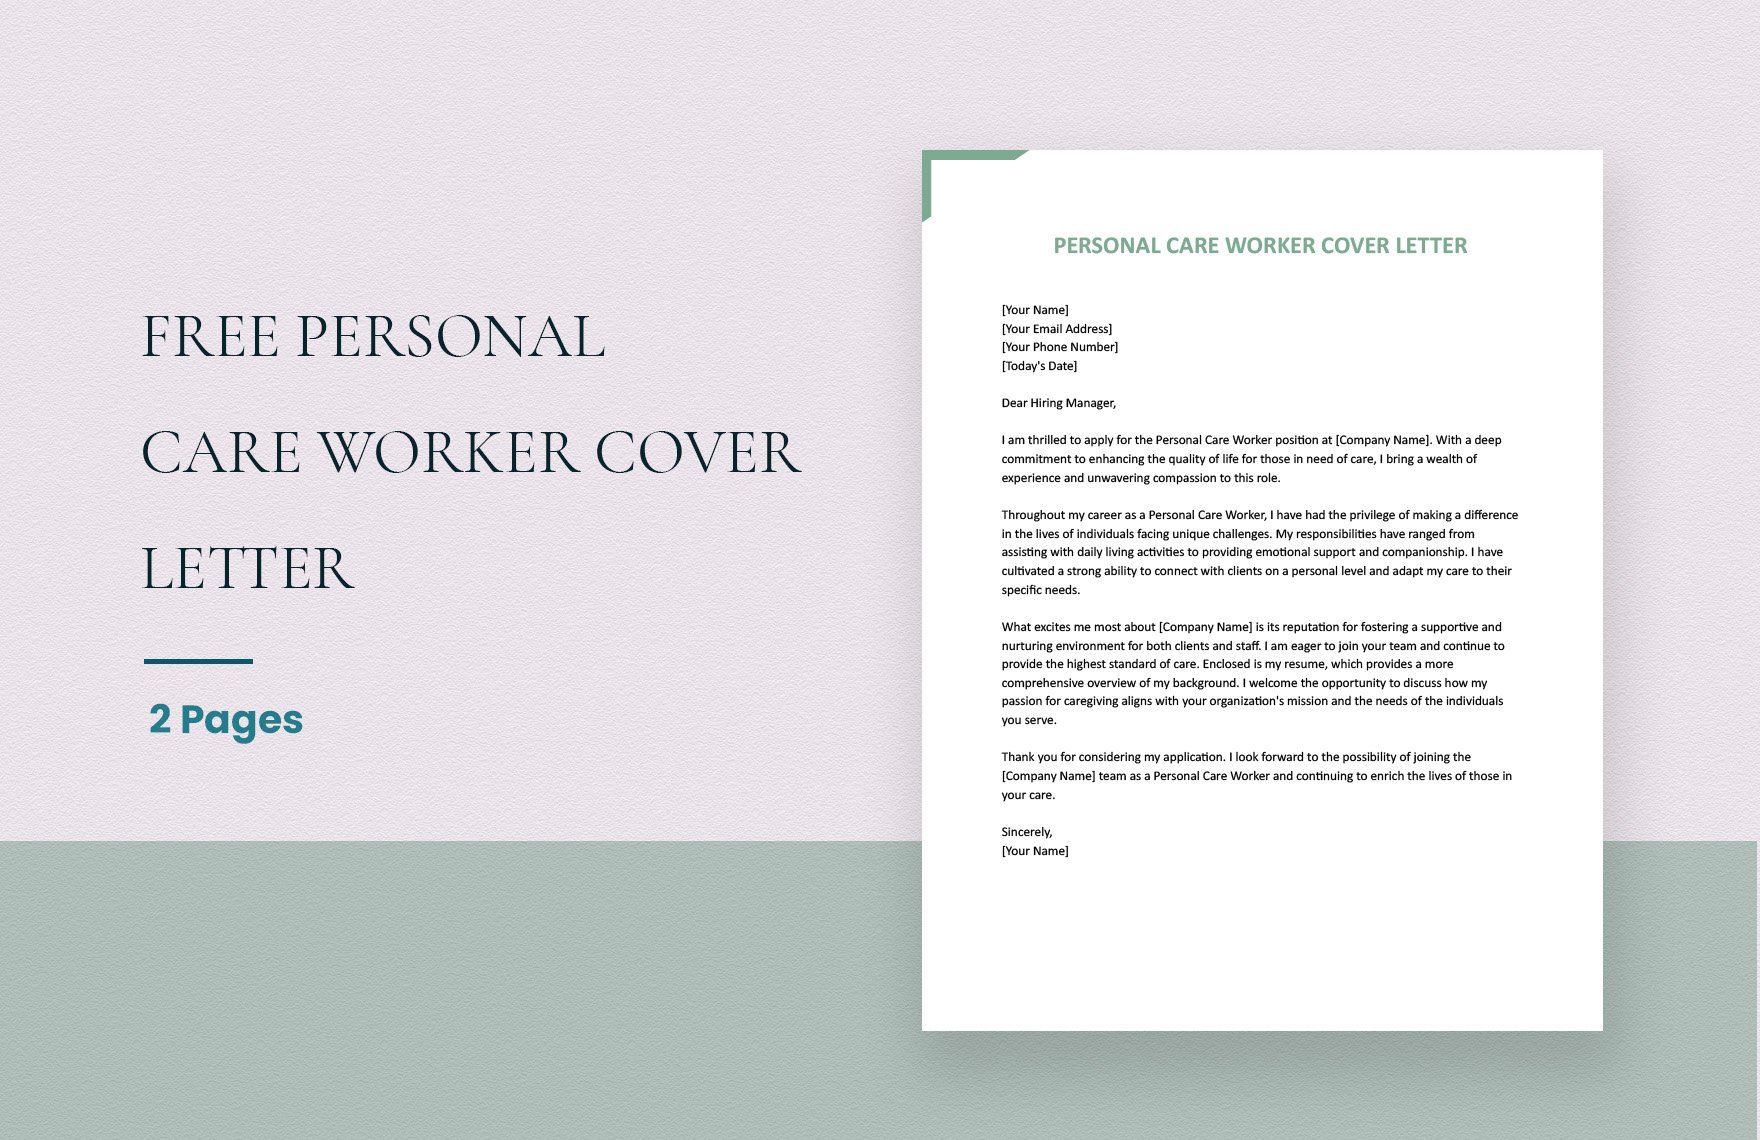 Personal Care Worker Cover Letter in Word, Google Docs